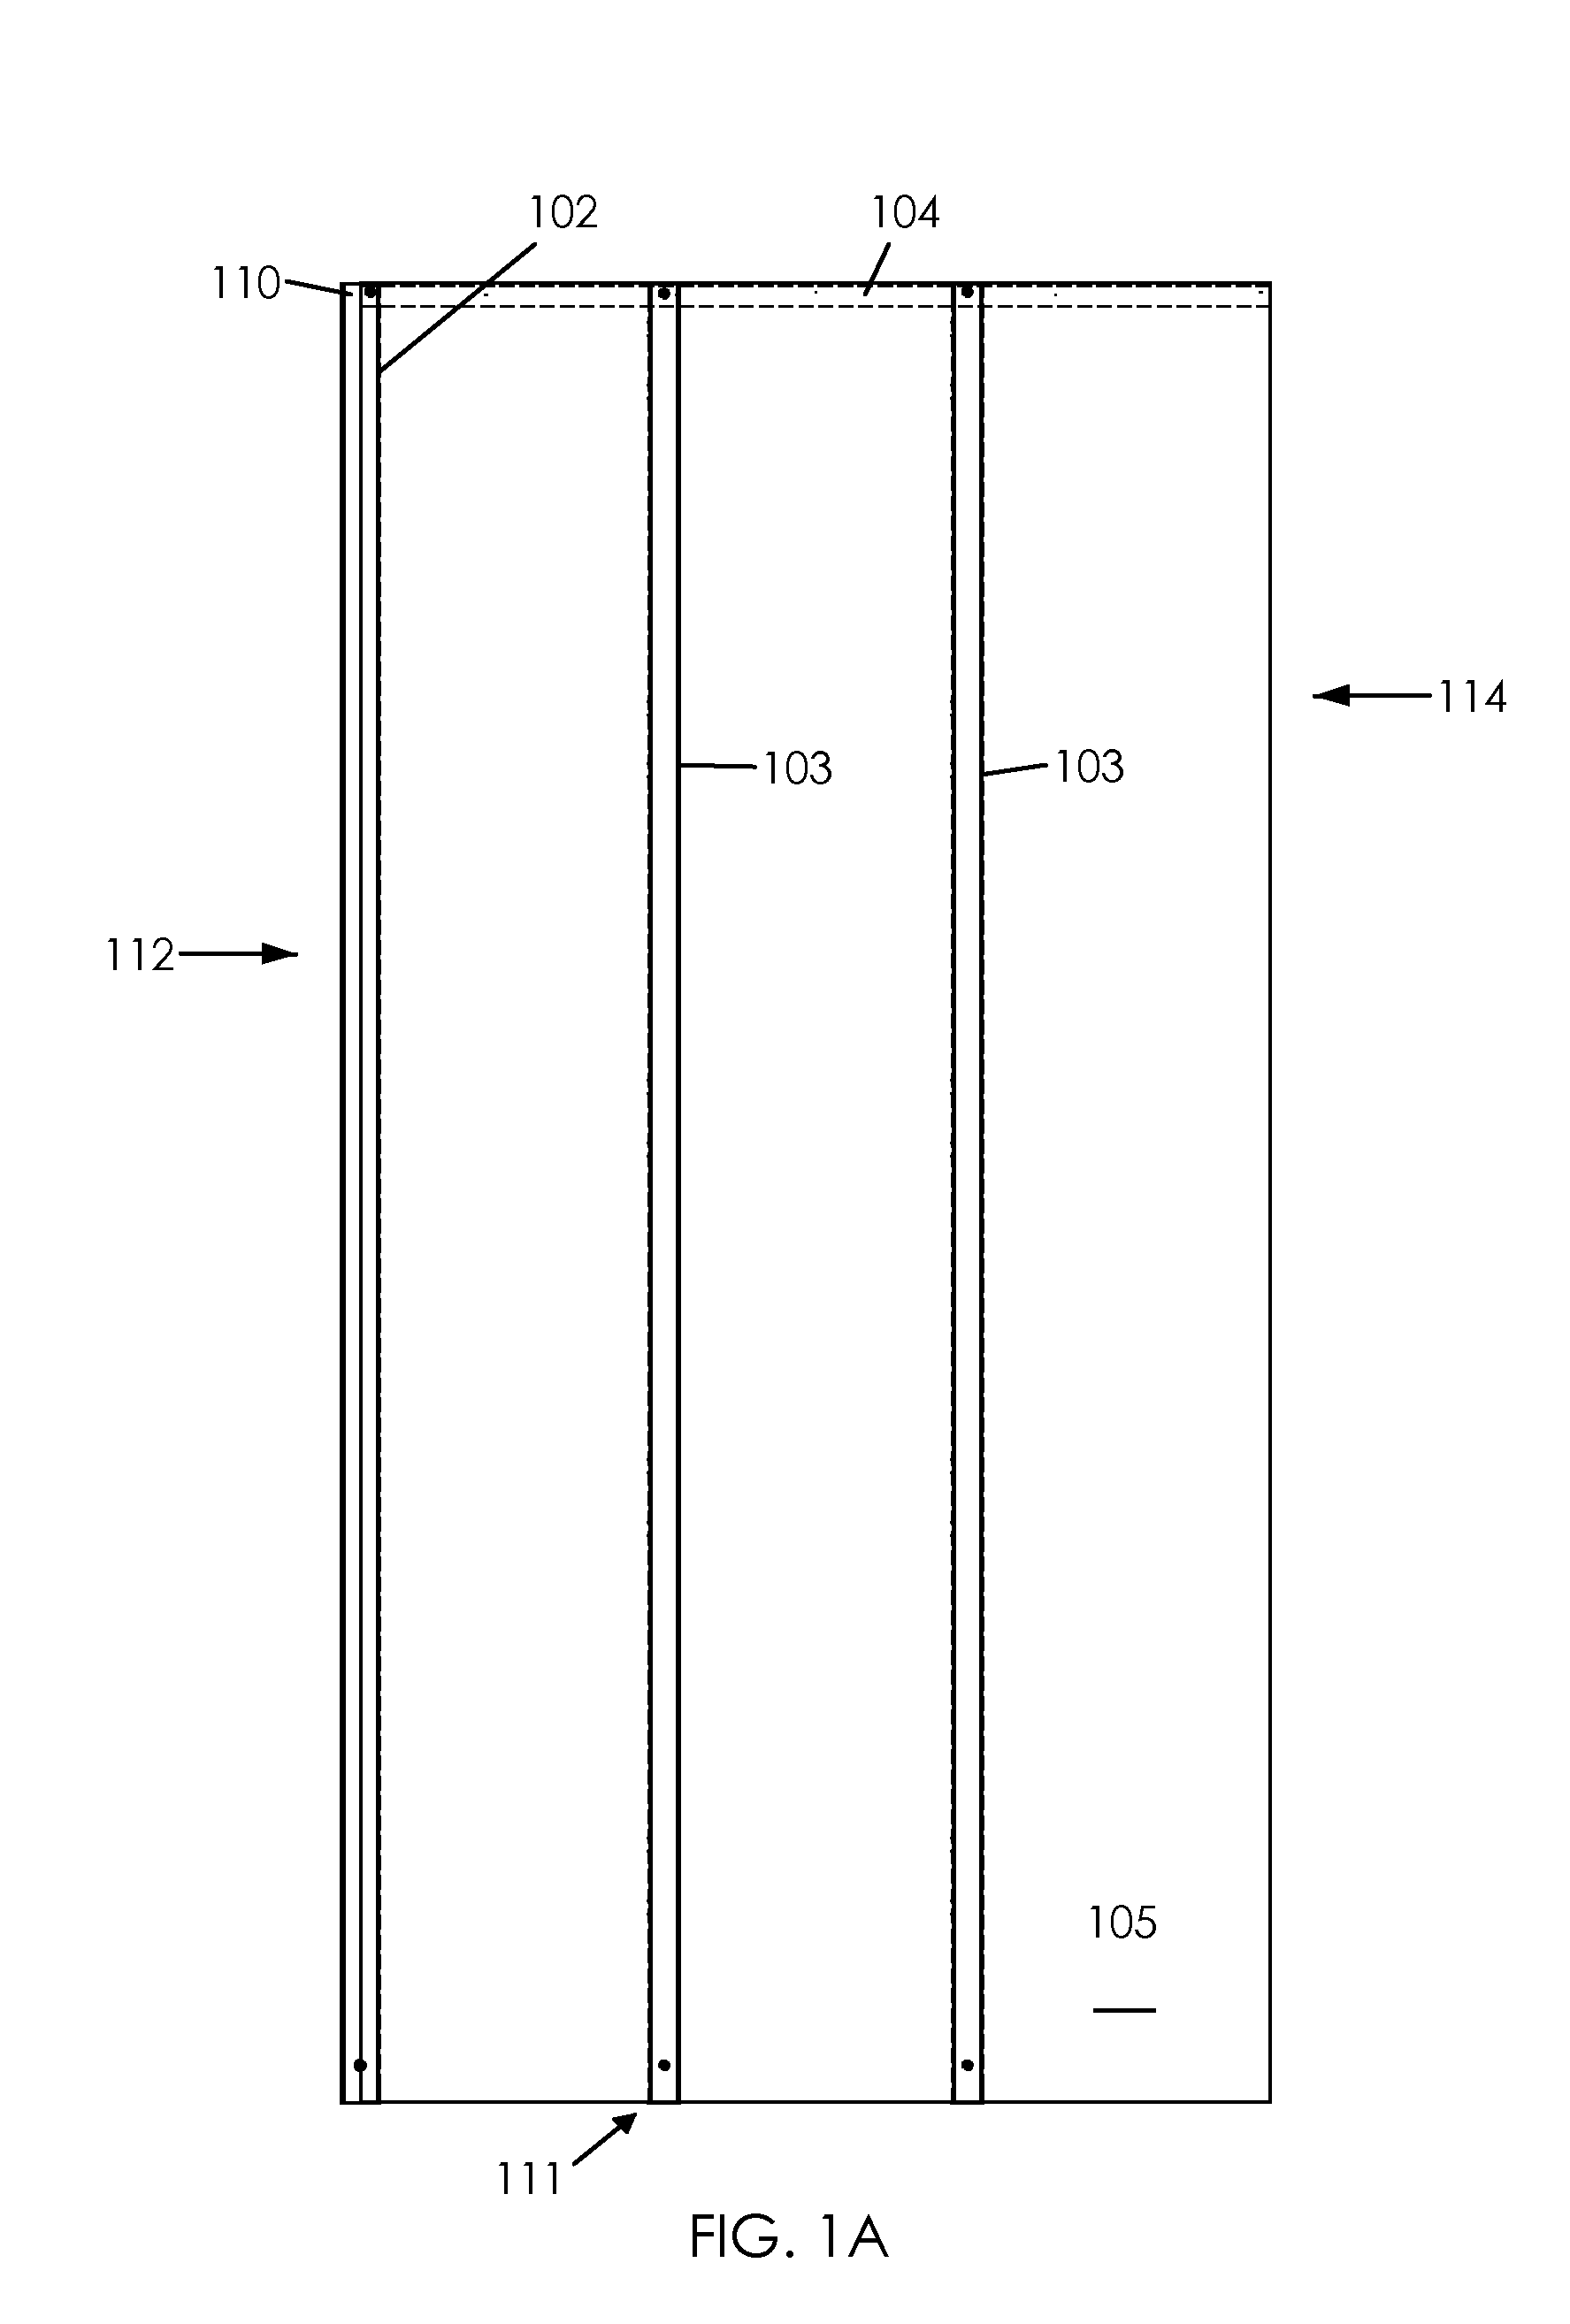 Structural wall panel for use in light-frame construction and method of construction employing structural wall panels